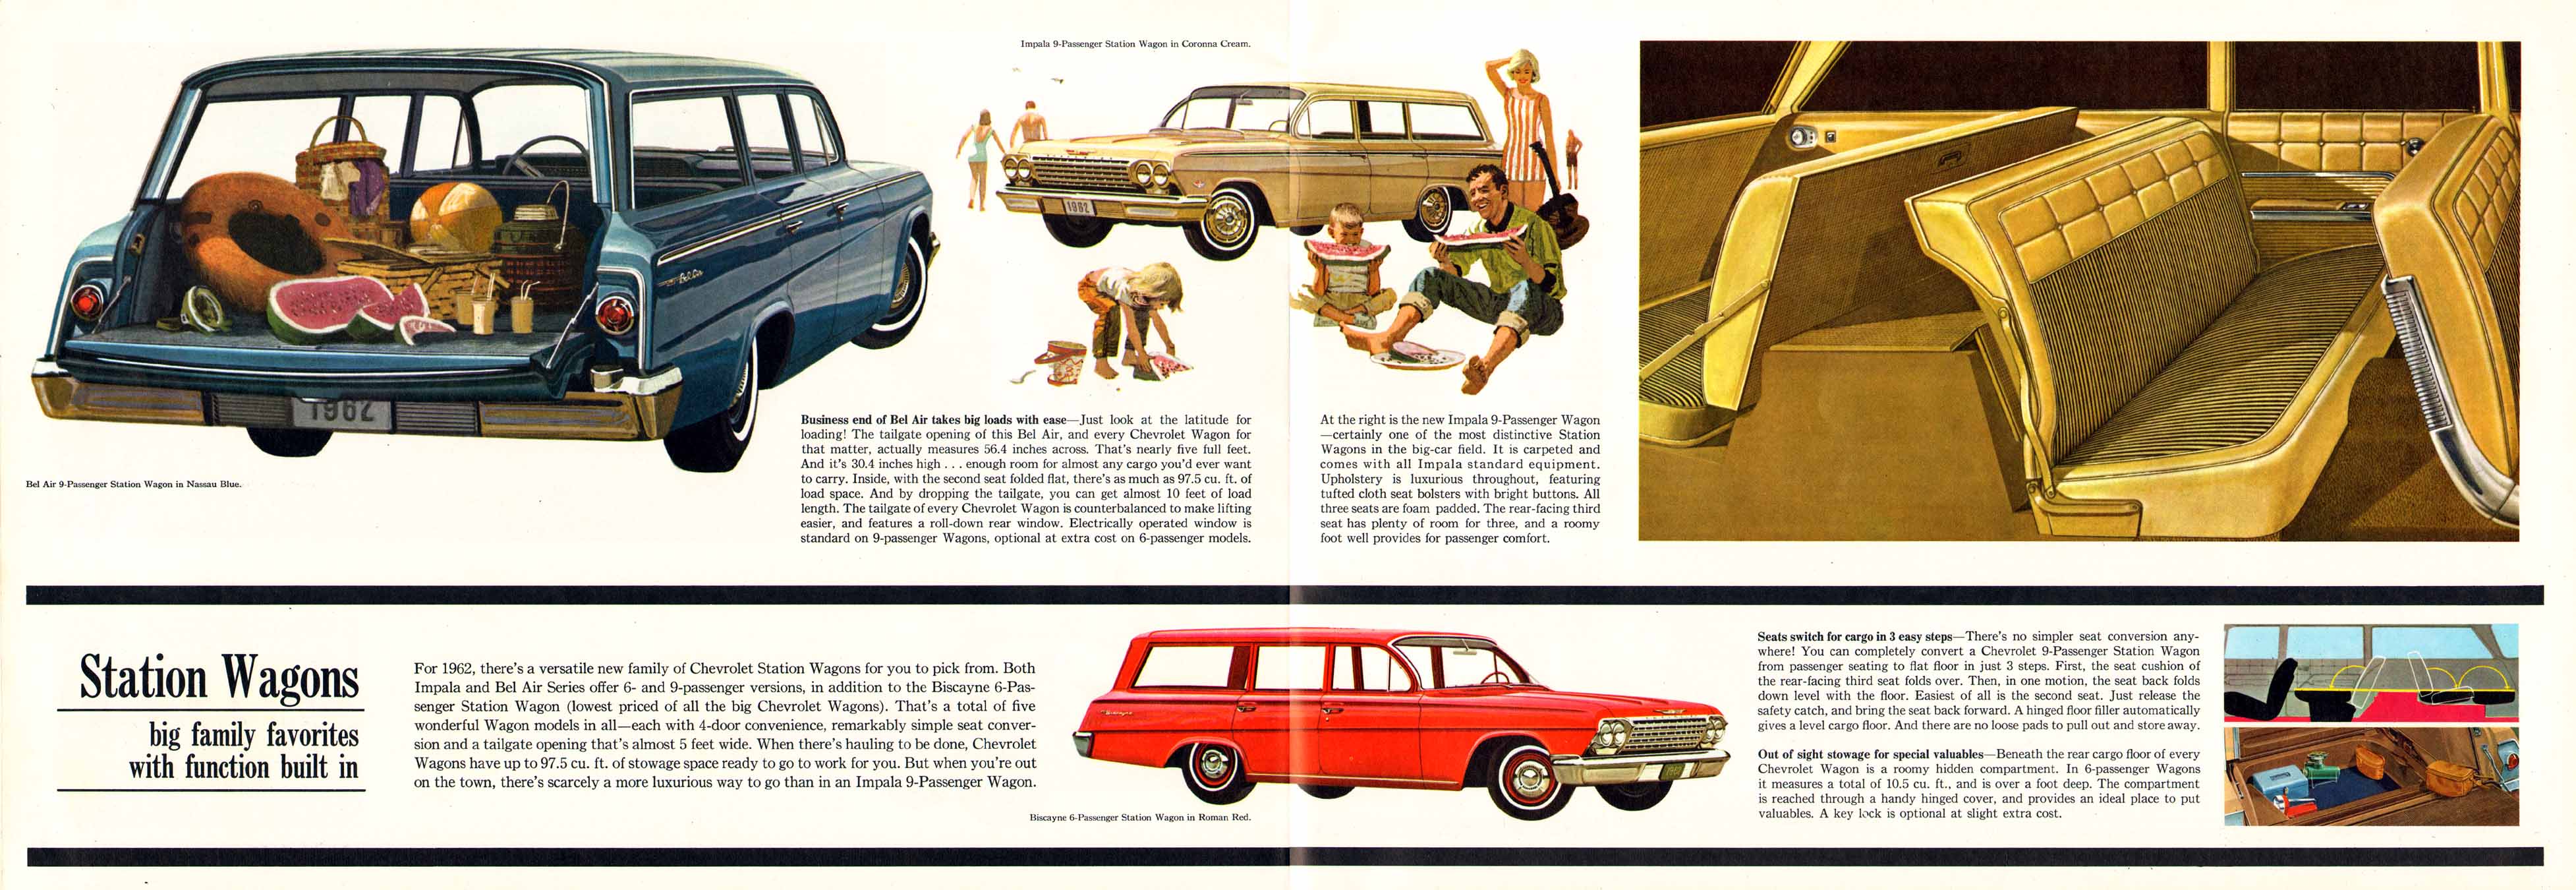 1962 Chevrolet Full-Size Brochure Page 2